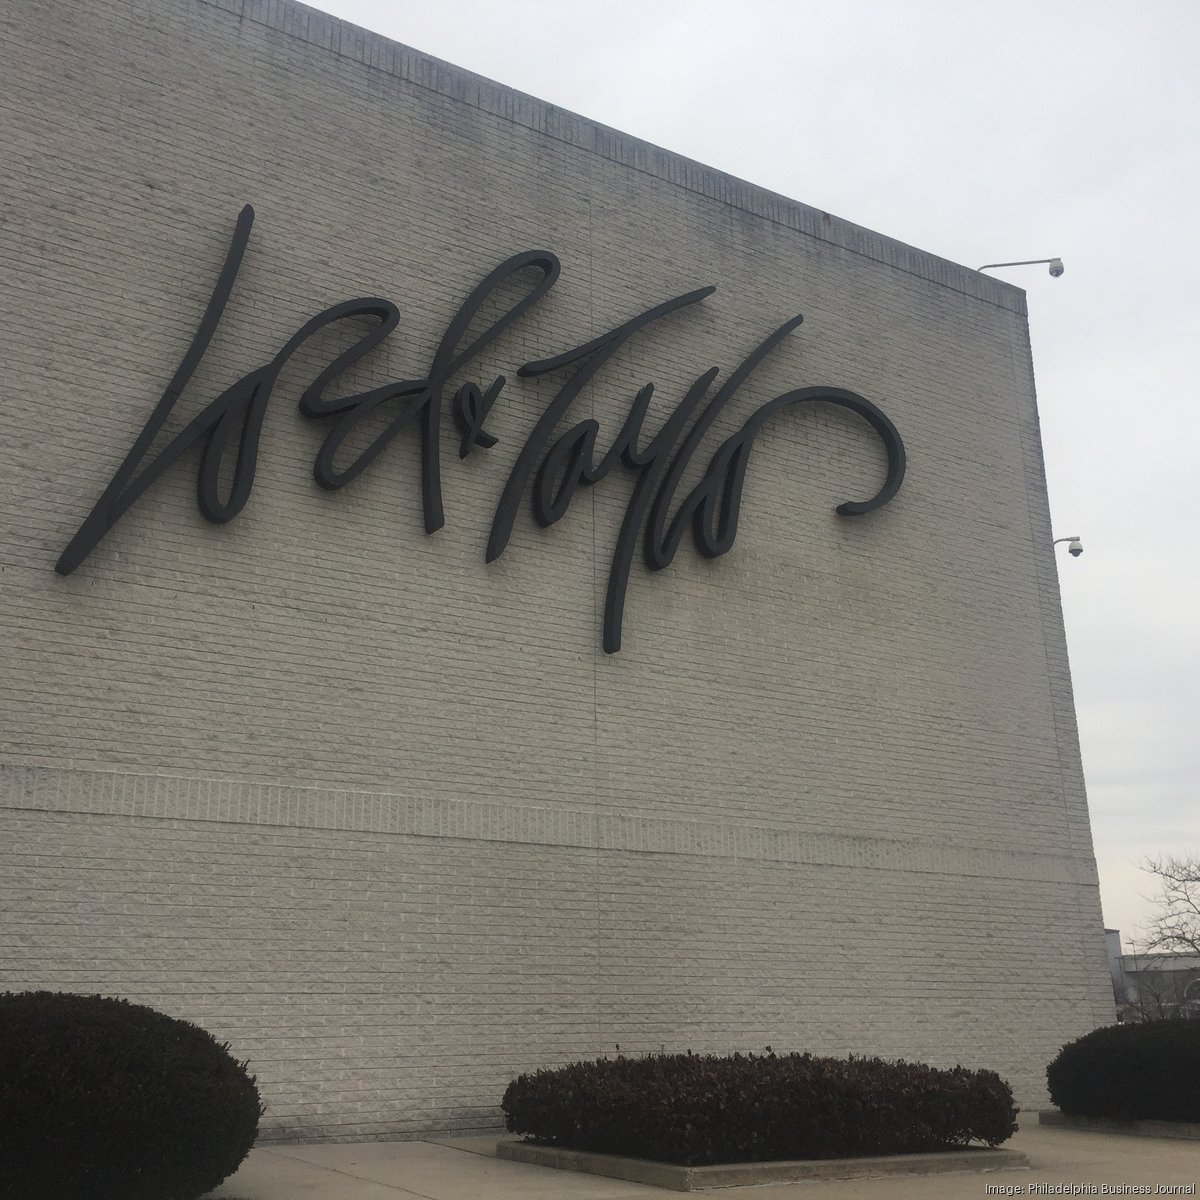 LORD + TAYLOR - CLOSED - 23 Photos & 32 Reviews - King of Prussia,  Pennsylvania - Department Stores - Yelp